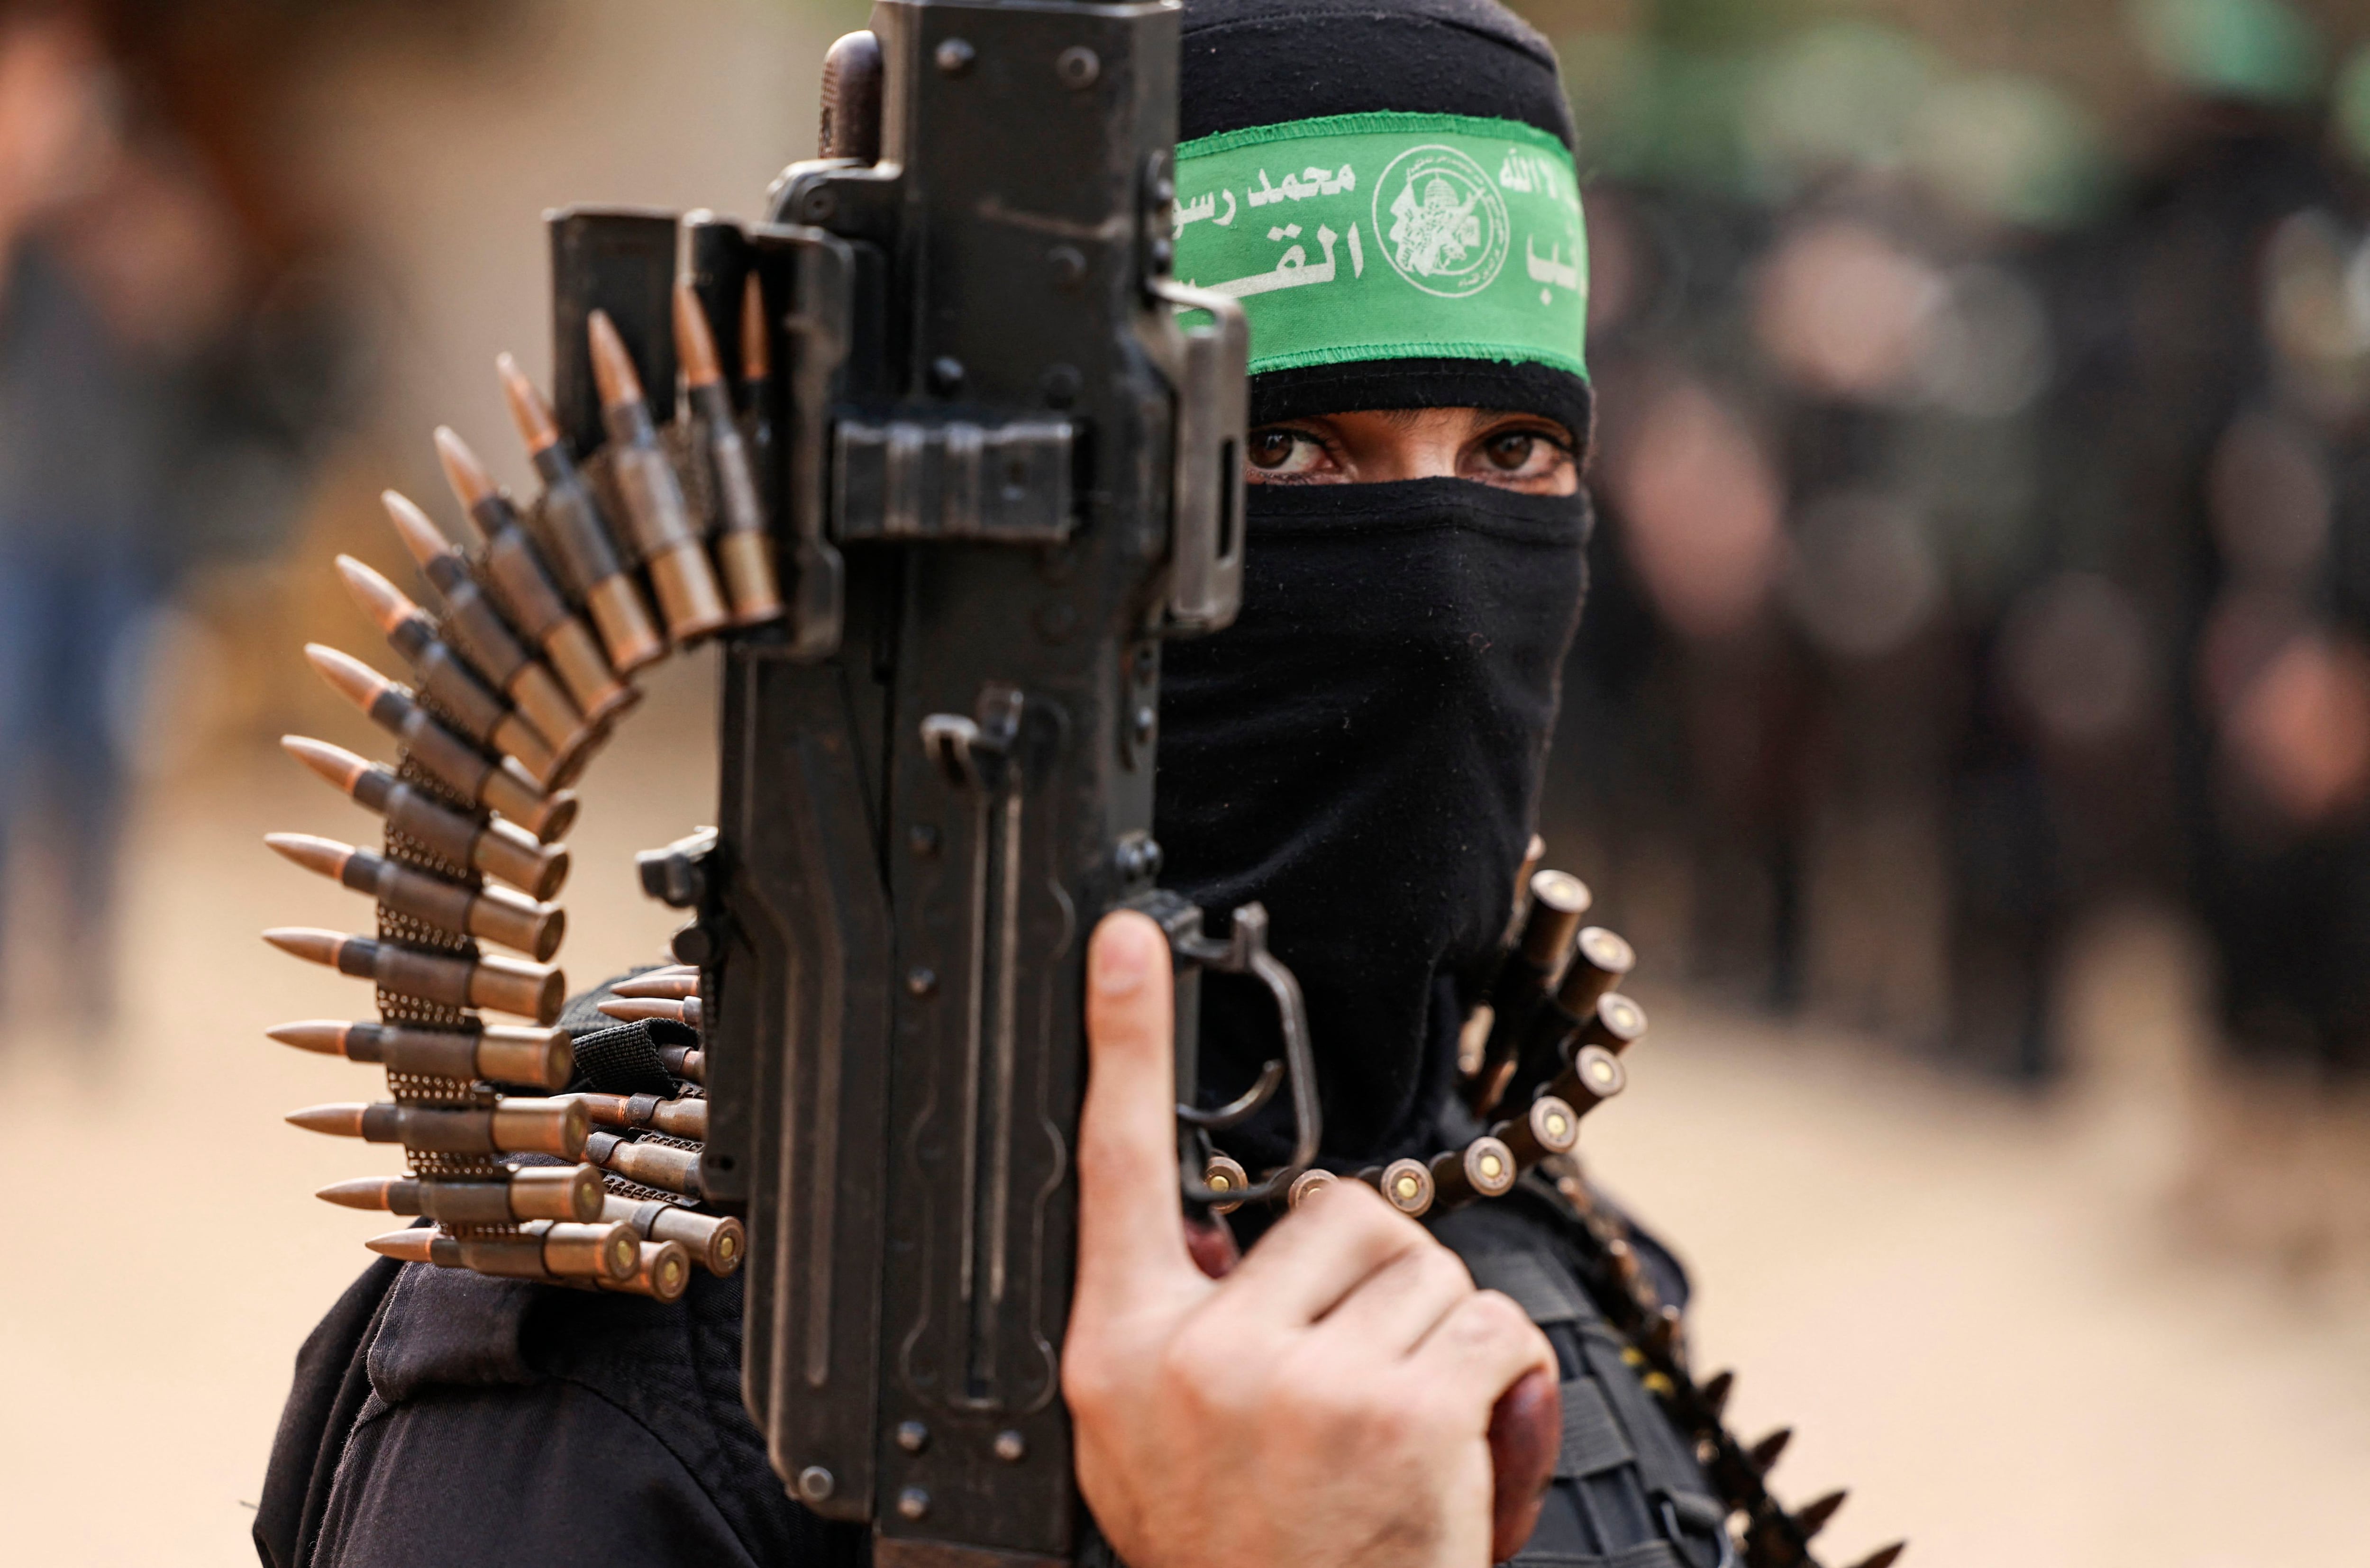 A member of the Ezzedine al-Qassam Brigades, the military wing of the Palestinian movement Hamas, takes part in a parade in Gaza City on November 14, 2021. (Photo by MAHMUD HAMS/AFP).